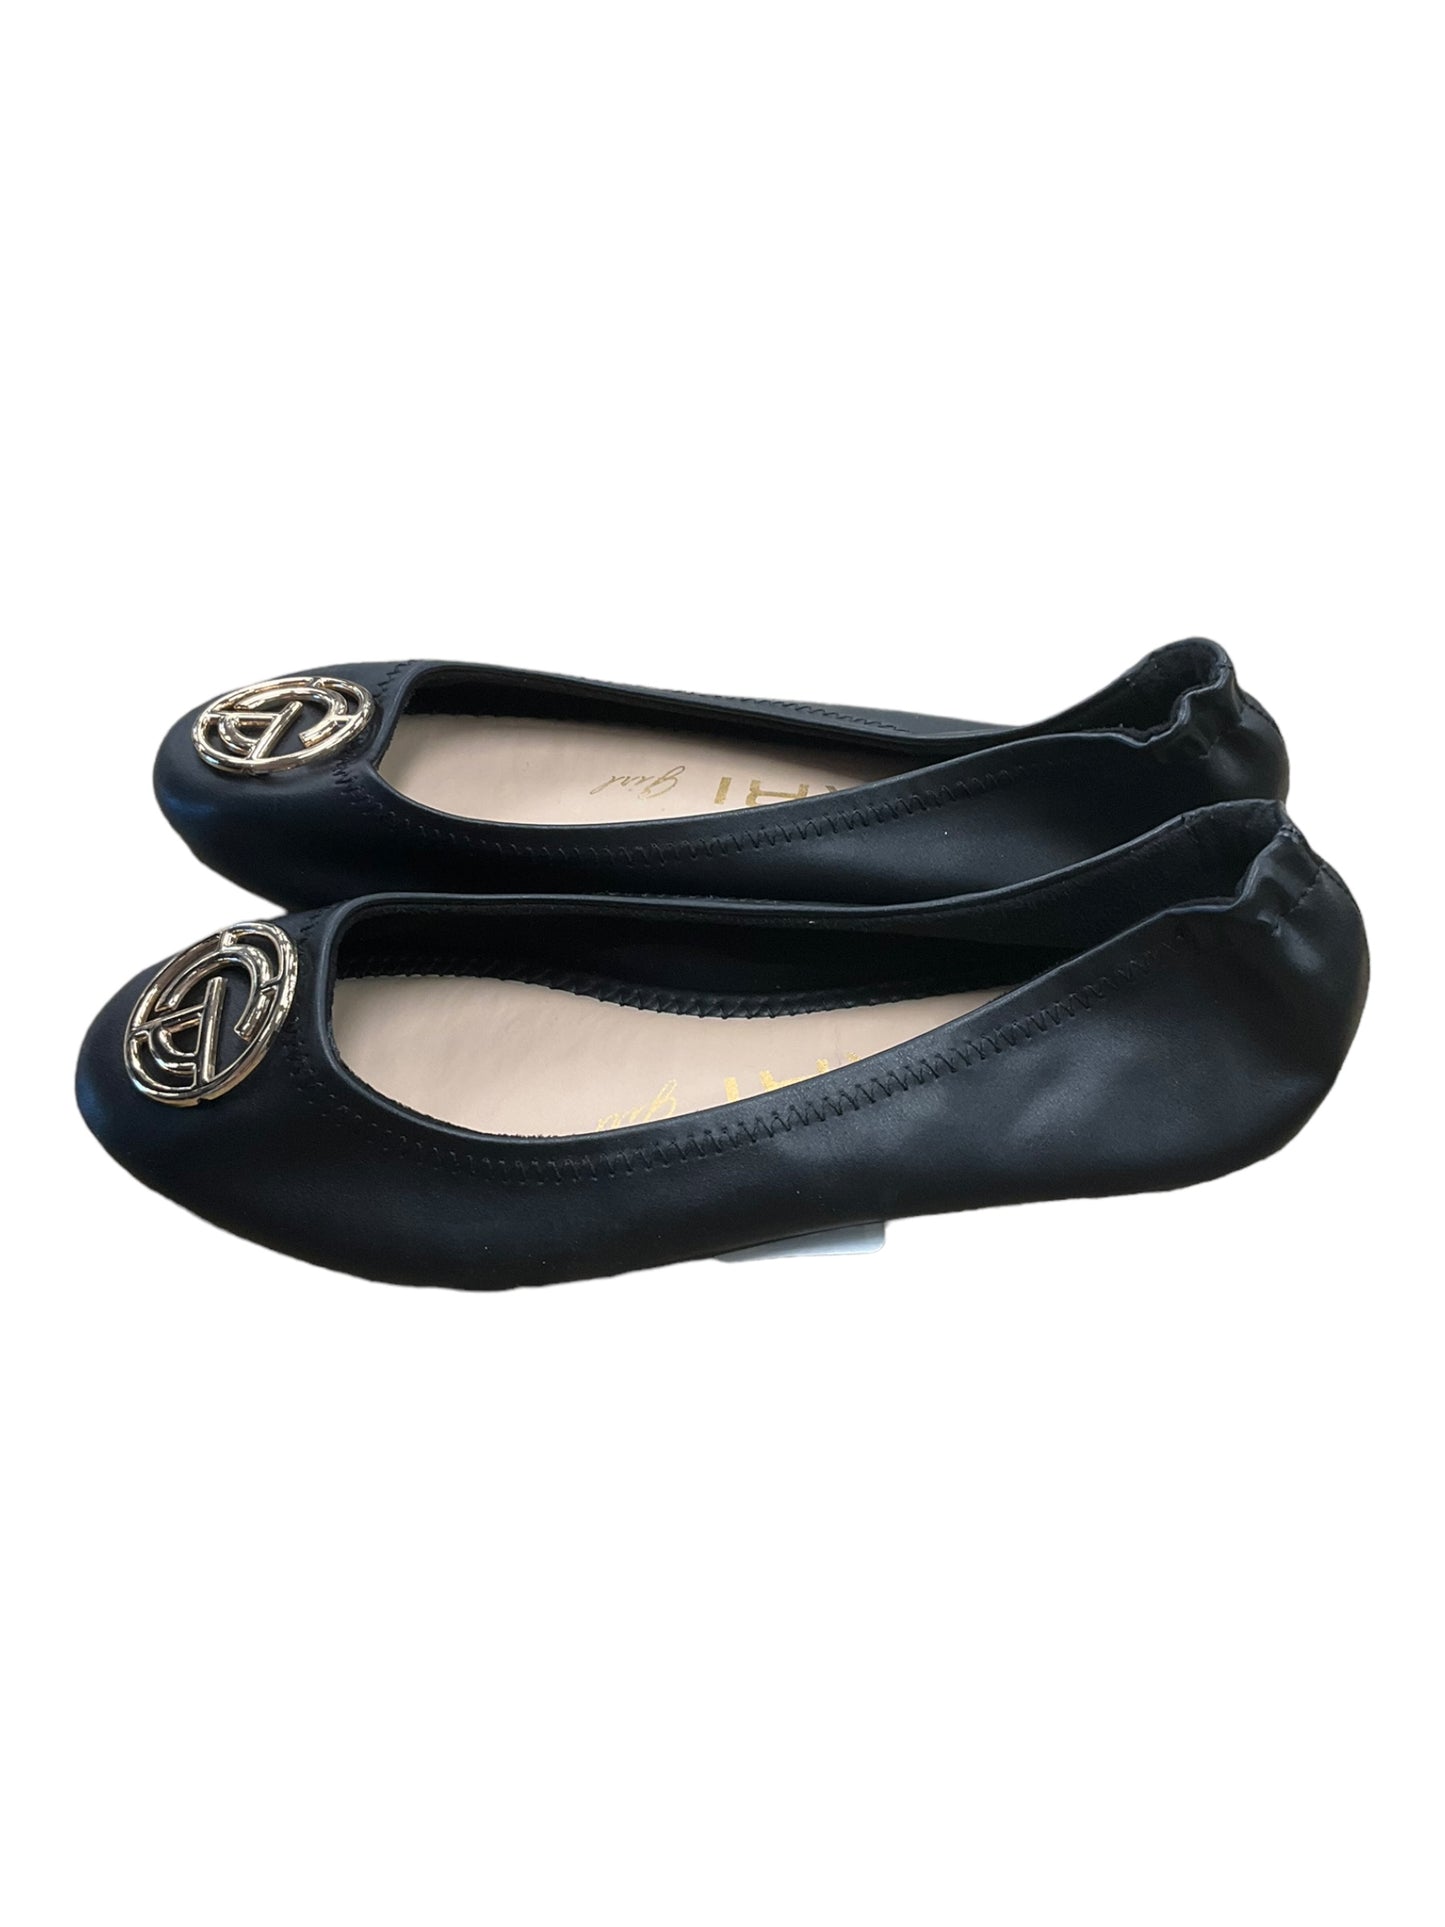 Shoes Flats Ballet By Tahari  Size: 6